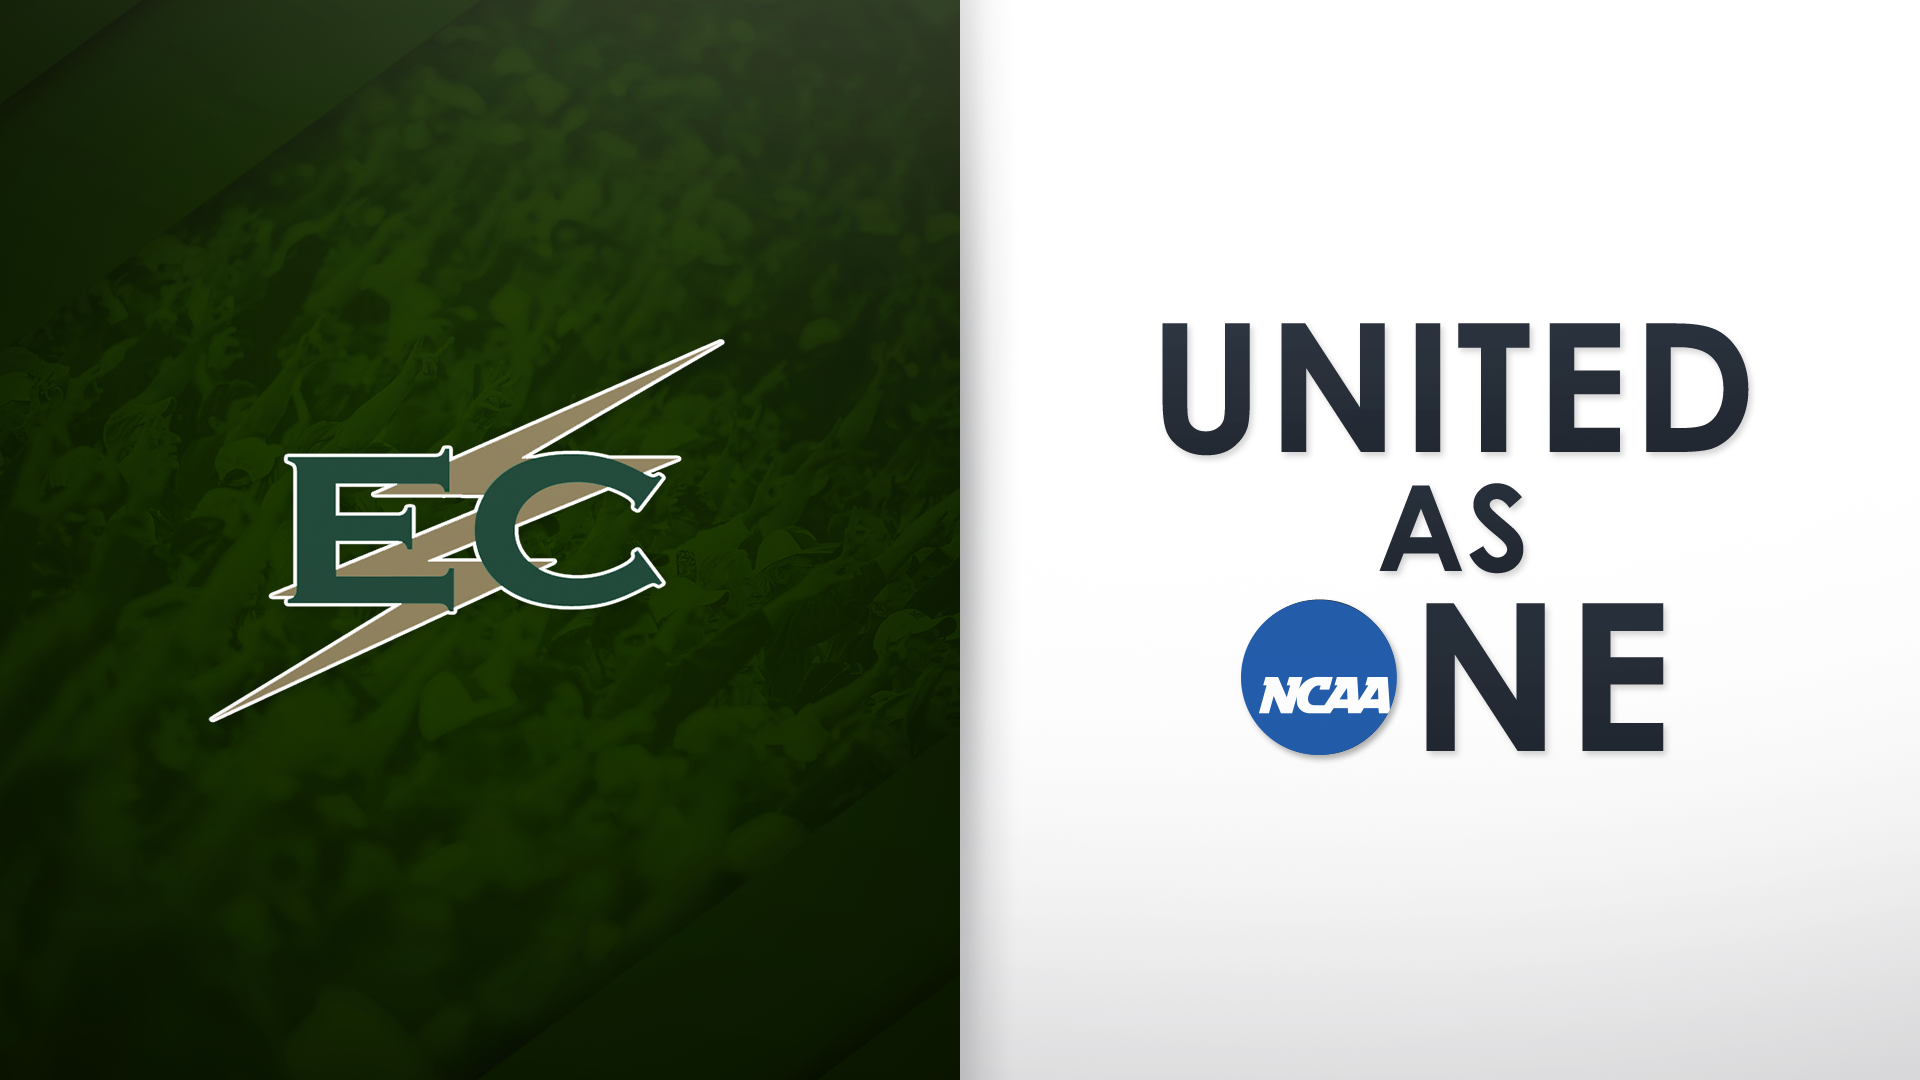 Elms College Athletics is United as One